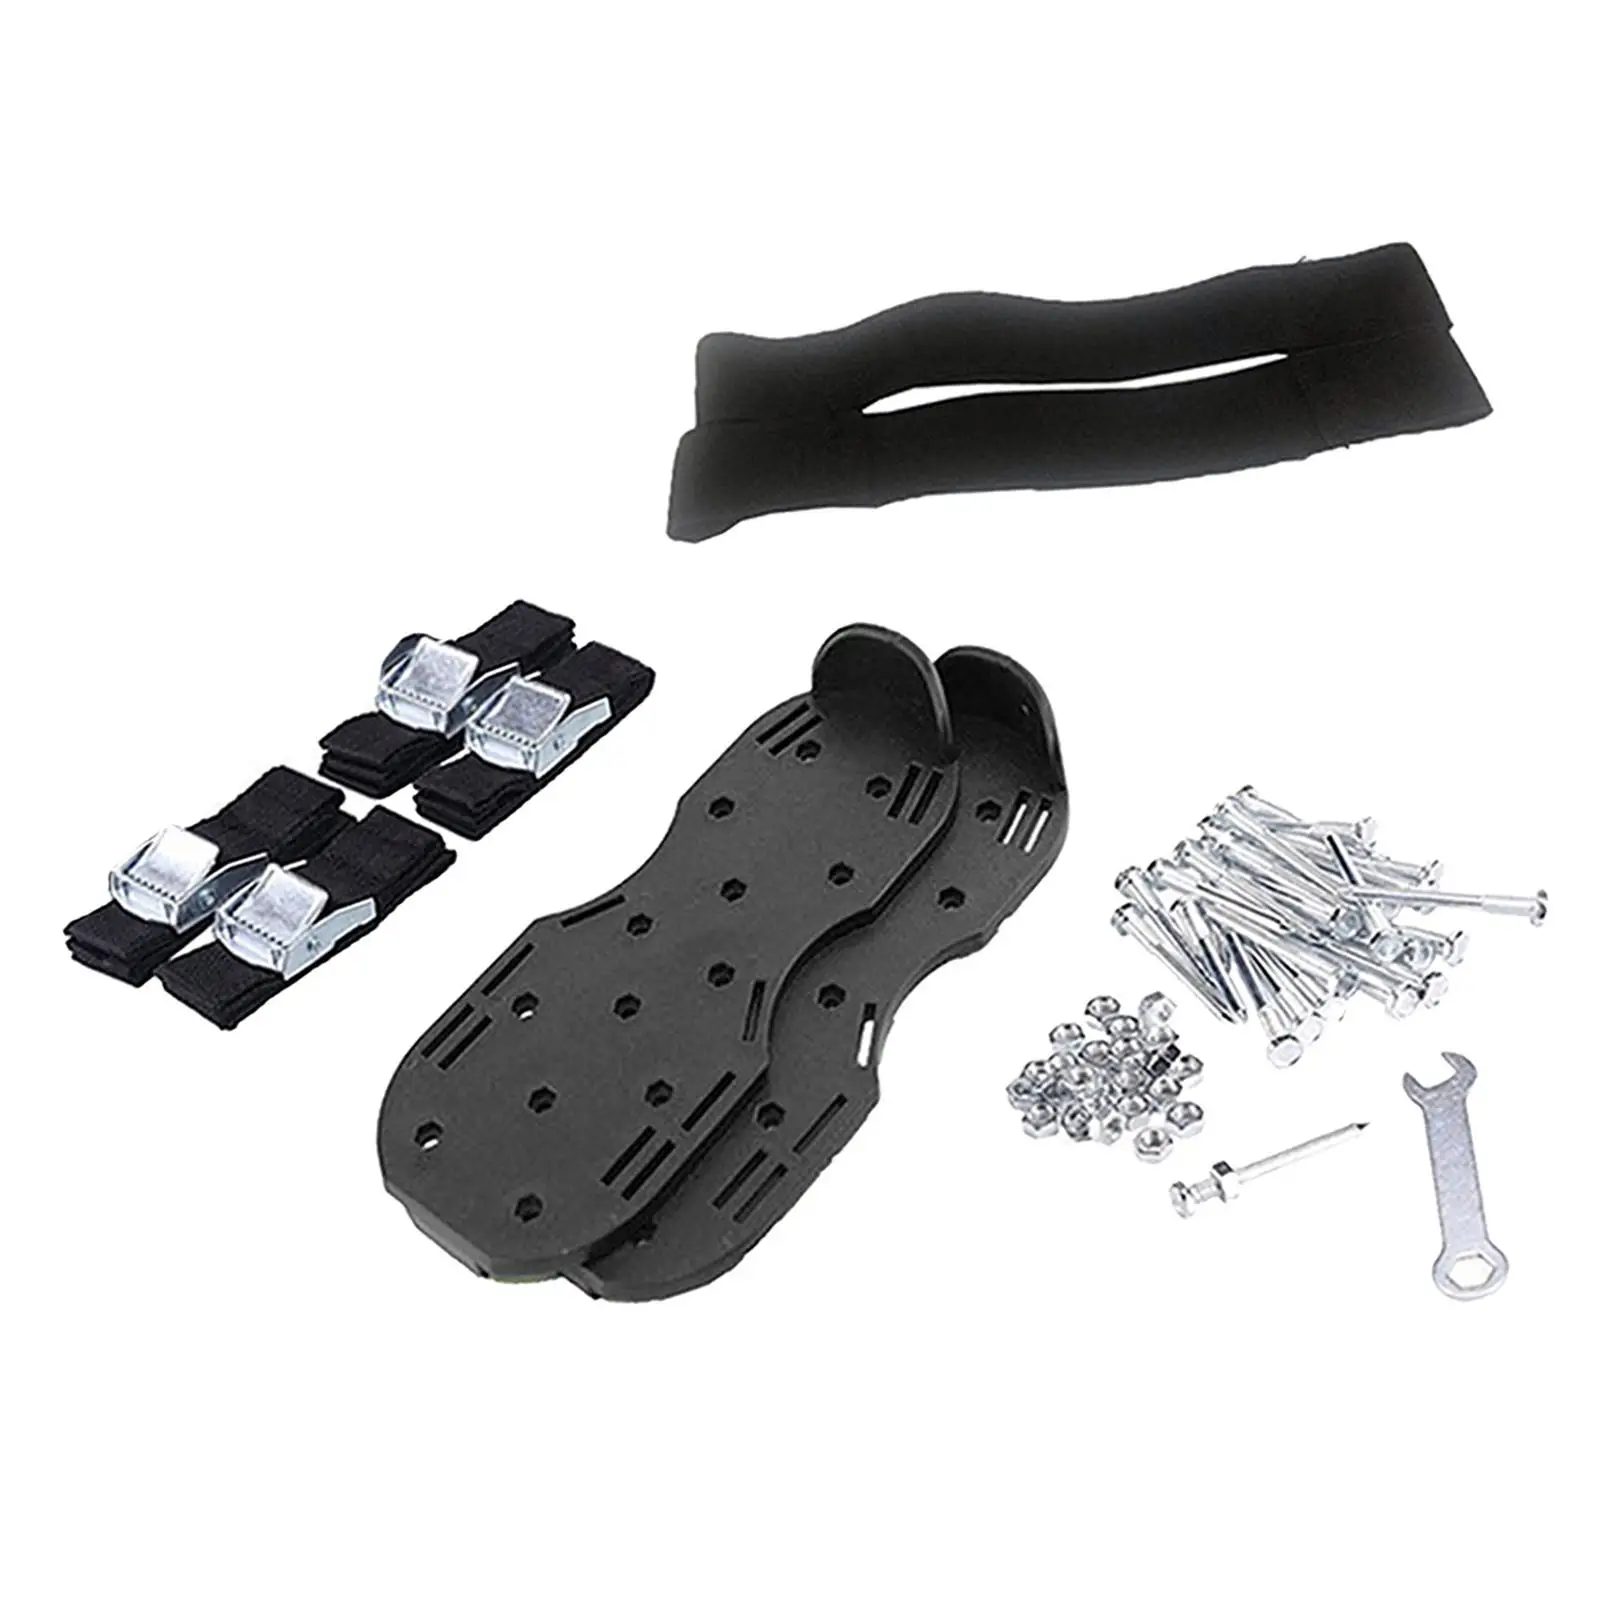 Lawn Aerator Comfortable Grass Aerating Sandals for Lawns - Aeration Shoe Pair with s Buckle